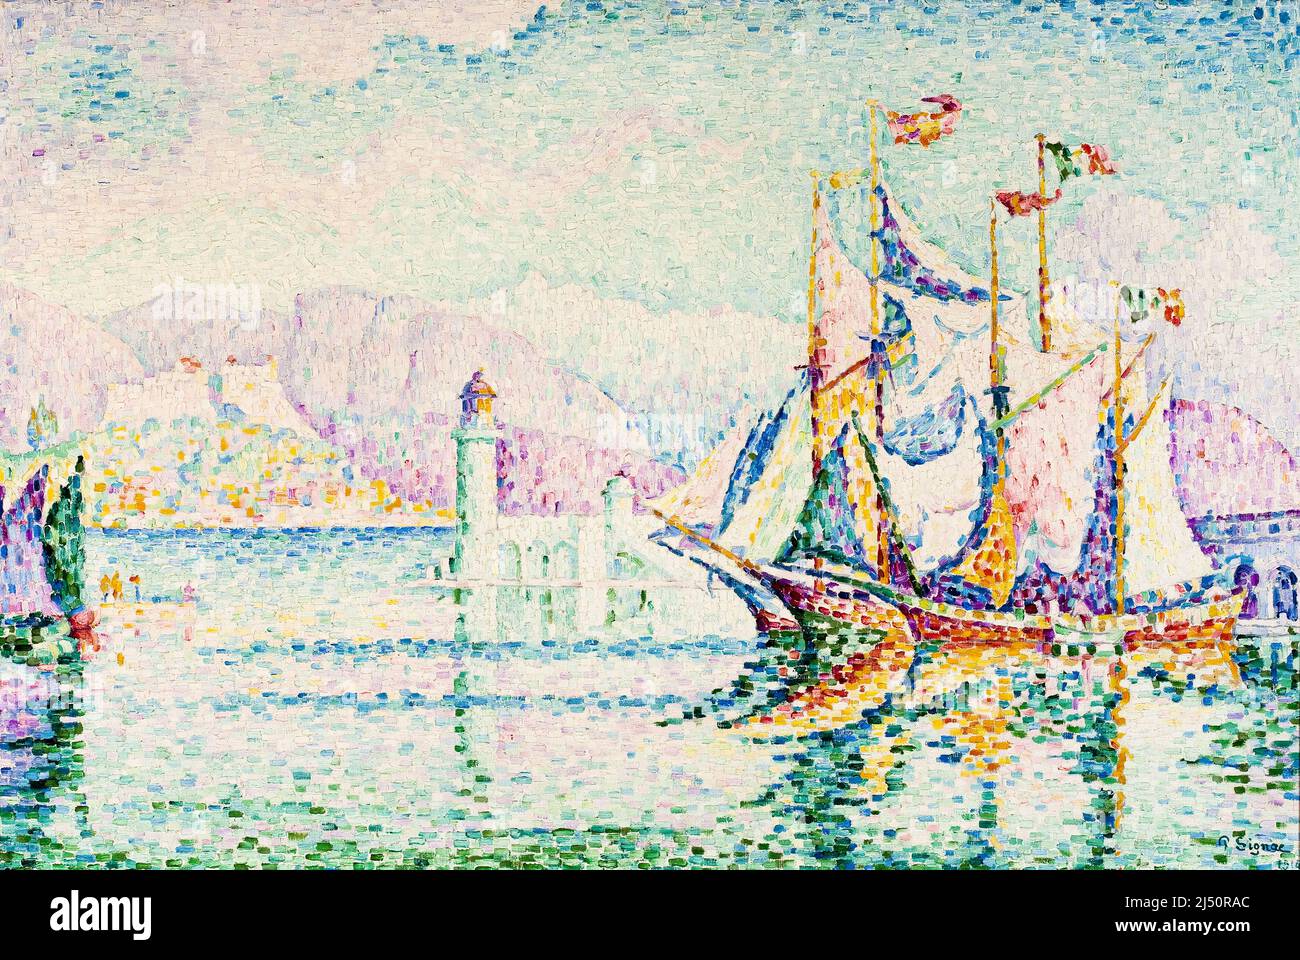 Paul Signac, Antibes, Morning, painting in oil on canvas, 1914 Stock Photo